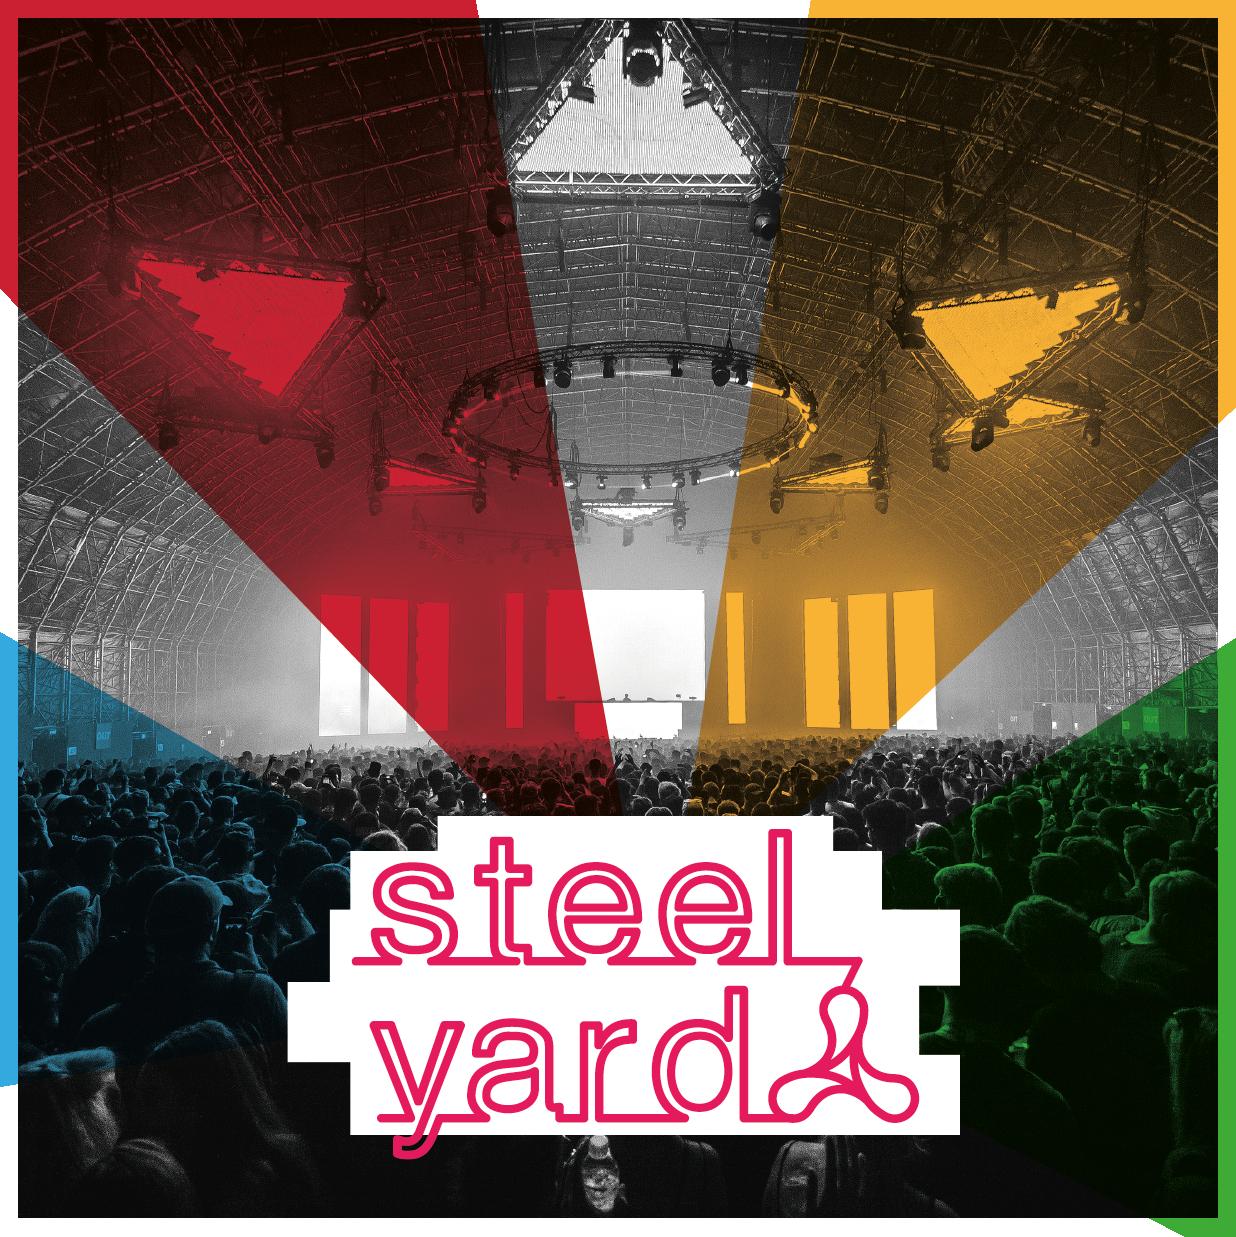 axwell & ingrosso steal yard